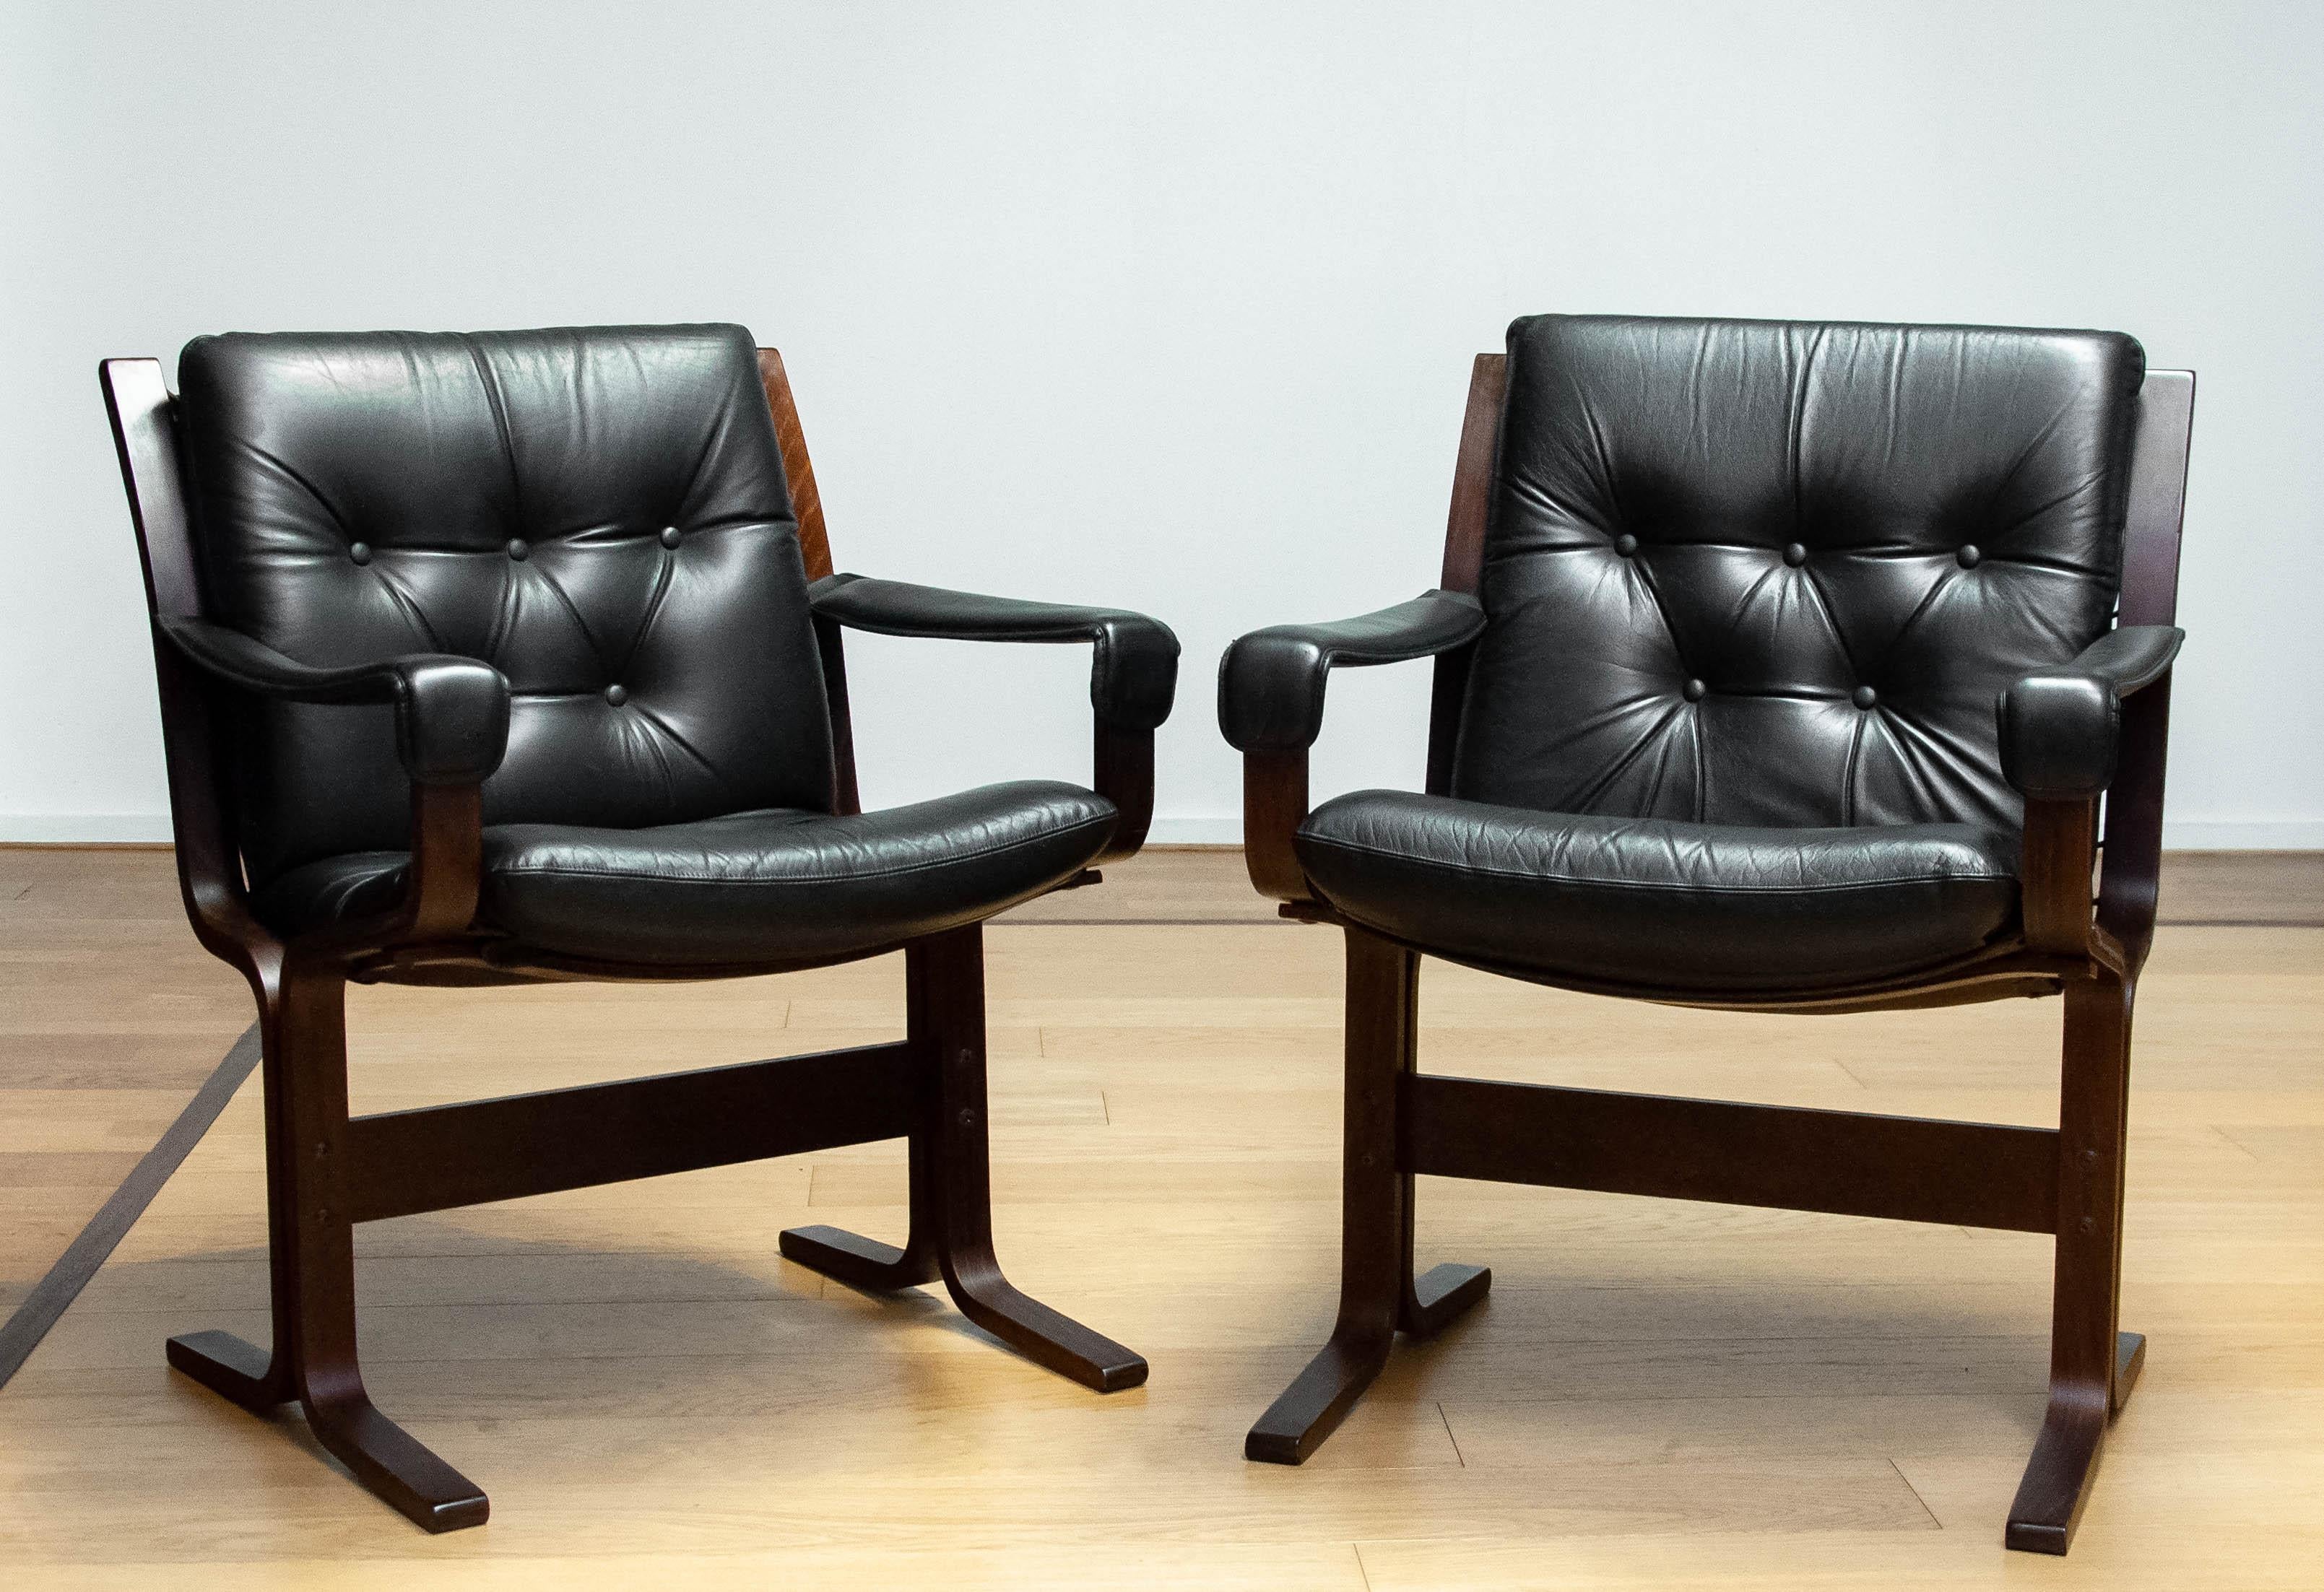 Beautiful and rare set of two, 1960s, black leather 'Siesta' dining  / office chairs designed by Ingmar Relling for Westnofa in Norway.
Both chairs tufted leather seats and backrests and leather upholstered armrests are in good condition as well as